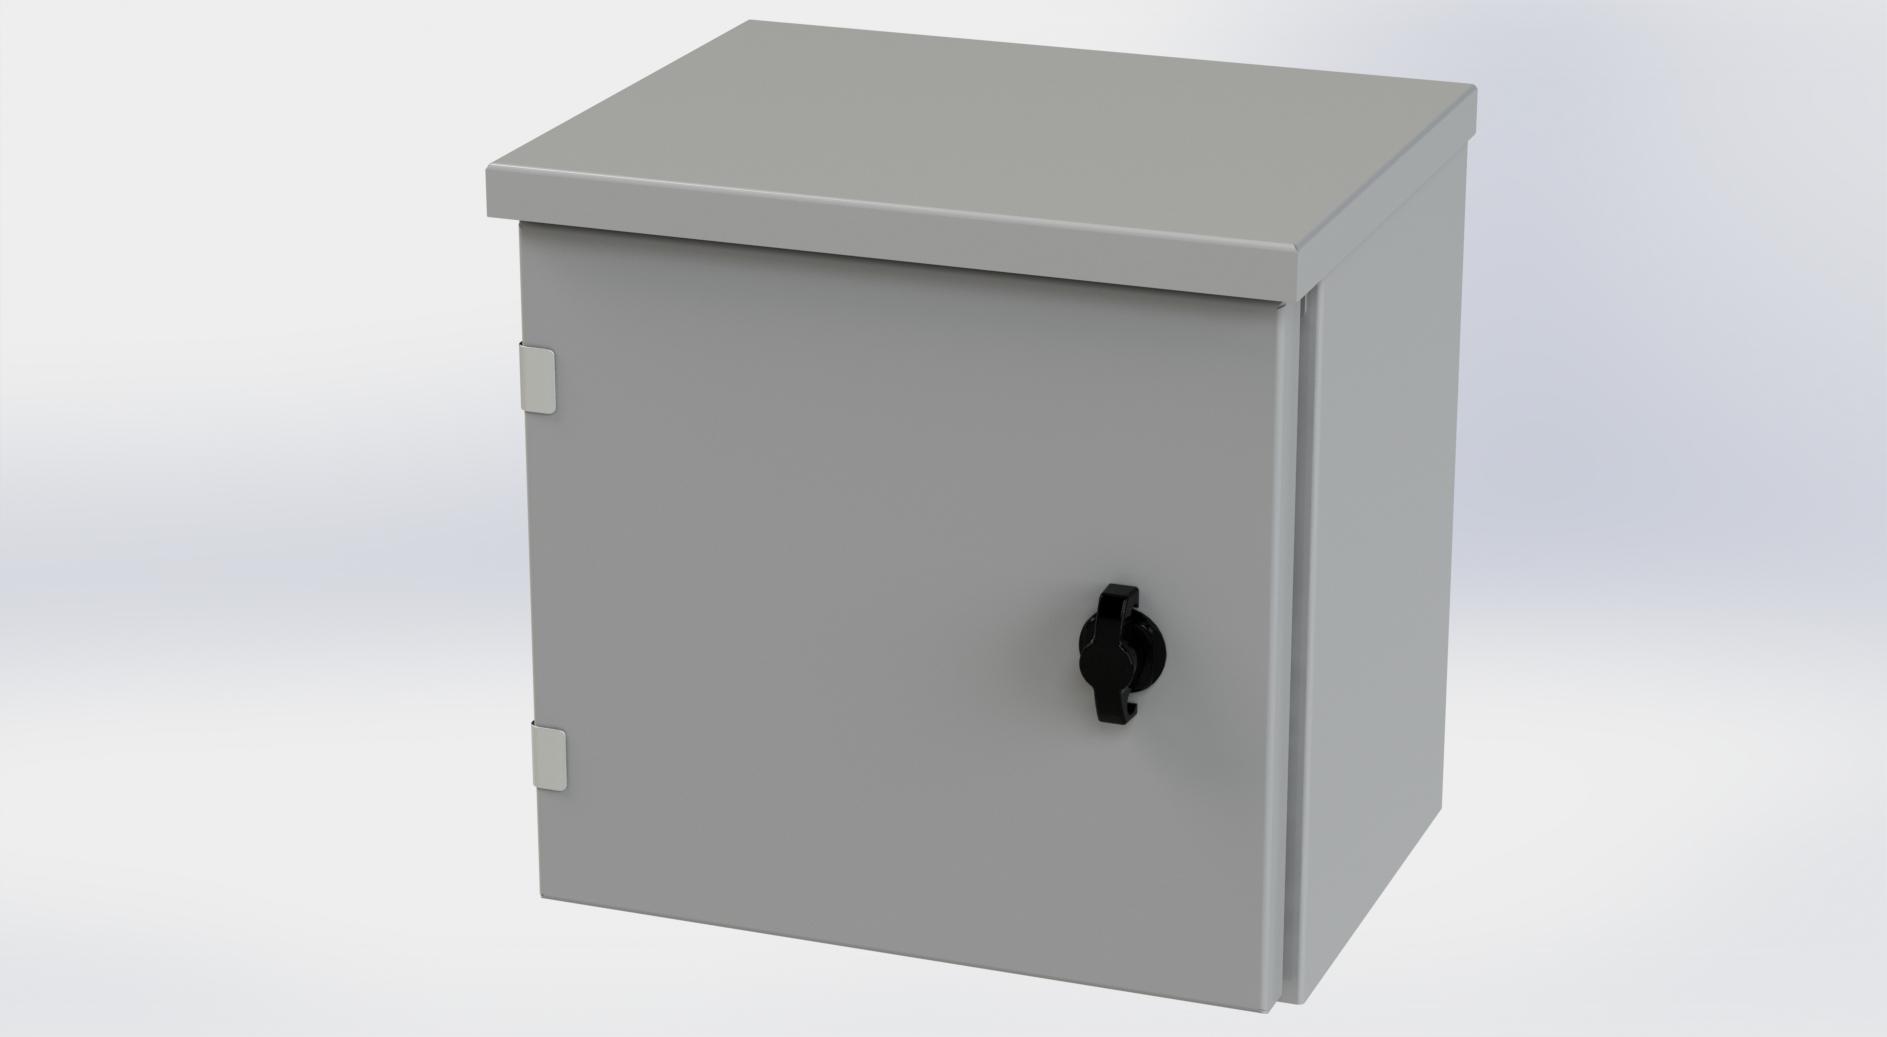 Saginaw Control SCE-12R1208LP Type-3R Hinged Cover Enclosure, Height:12.00", Width:12.00", Depth:8.00", ANSI-61 gray powder coating inside and out. Optional sub-panels are powder coated white.